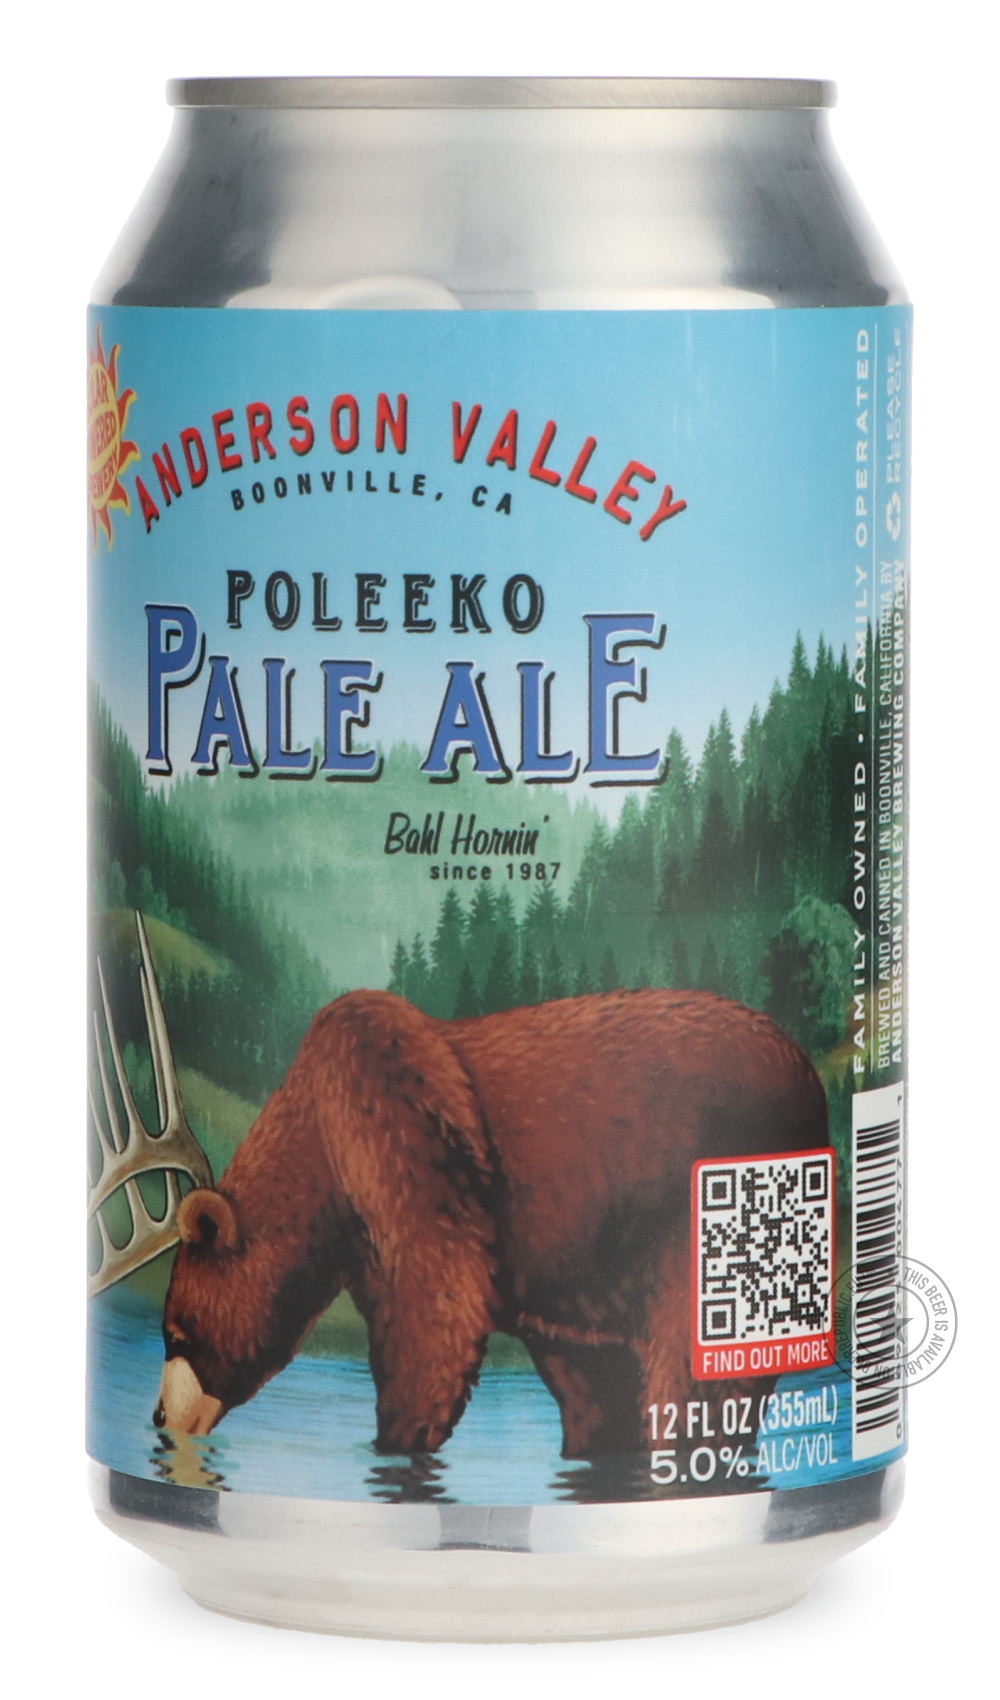 -Anderson Valley- Poleeko Pale Ale-Pale- Only @ Beer Republic - The best online beer store for American & Canadian craft beer - Buy beer online from the USA and Canada - Bier online kopen - Amerikaans bier kopen - Craft beer store - Craft beer kopen - Amerikanisch bier kaufen - Bier online kaufen - Acheter biere online - IPA - Stout - Porter - New England IPA - Hazy IPA - Imperial Stout - Barrel Aged - Barrel Aged Imperial Stout - Brown - Dark beer - Blond - Blonde - Pilsner - Lager - Wheat - Weizen - Amber